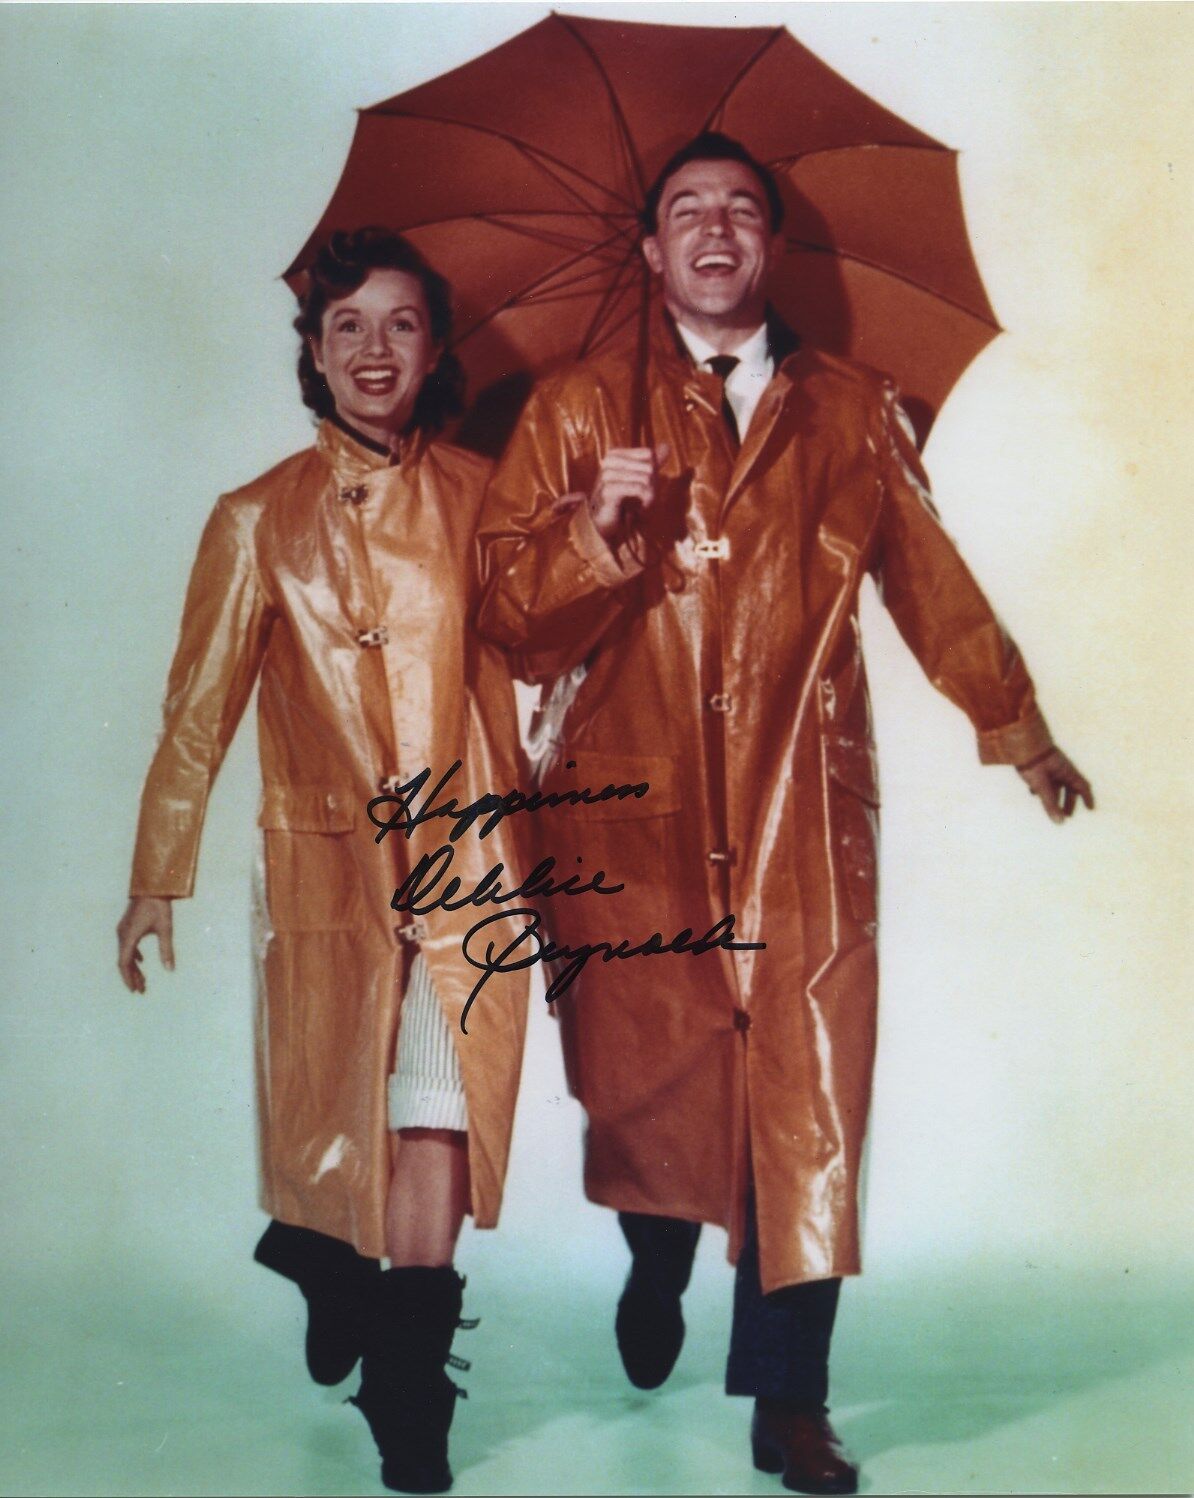 DEBBIE REYNOLDS SIGNED PHOTO SINGING IN THE RAIN AUTHENTIC  NOT SECRETARIAL